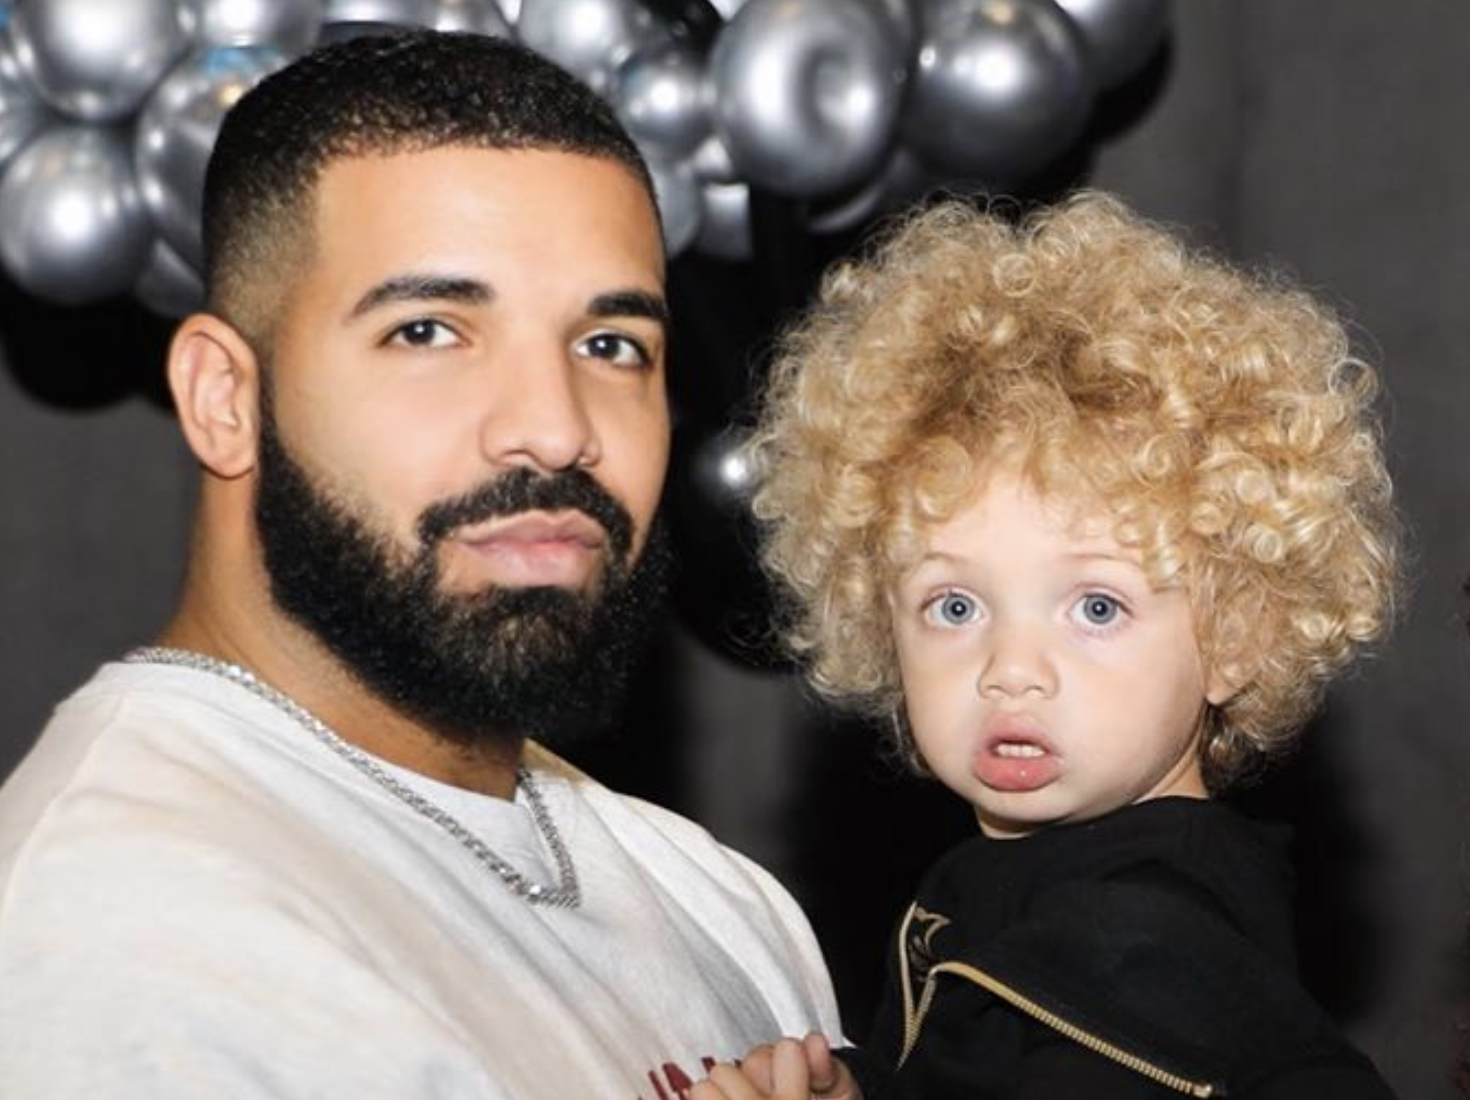 Drake shares first photos of his blond, curly haired son Adonis